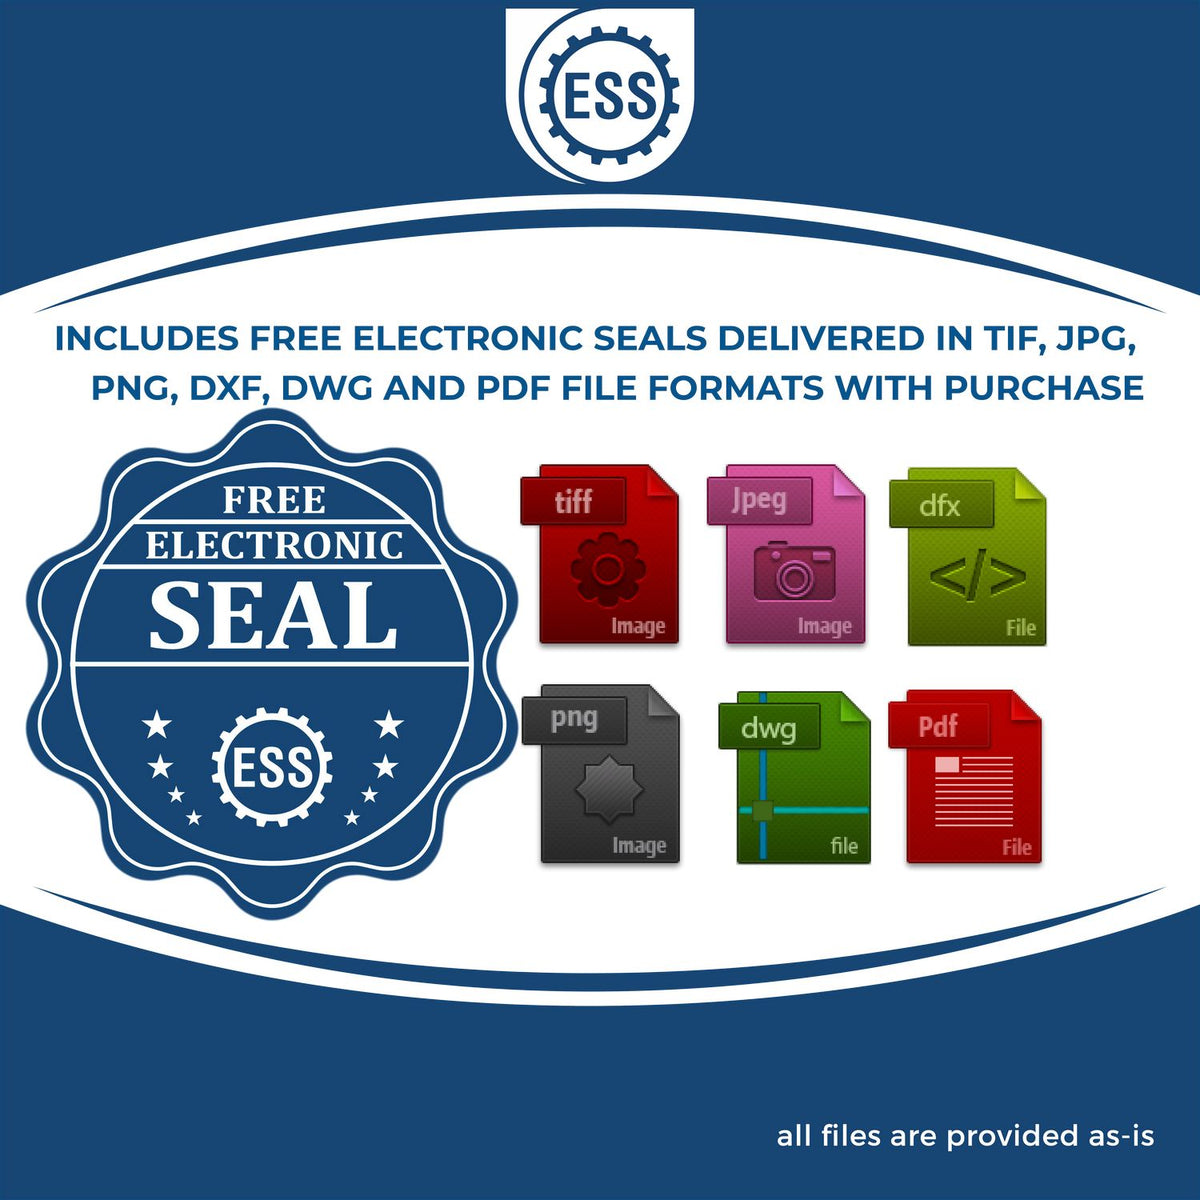 An infographic for the free electronic seal for the Wooden Handle Ohio State Seal Notary Public Stamp illustrating the different file type icons such as DXF, DWG, TIF, JPG and PNG.